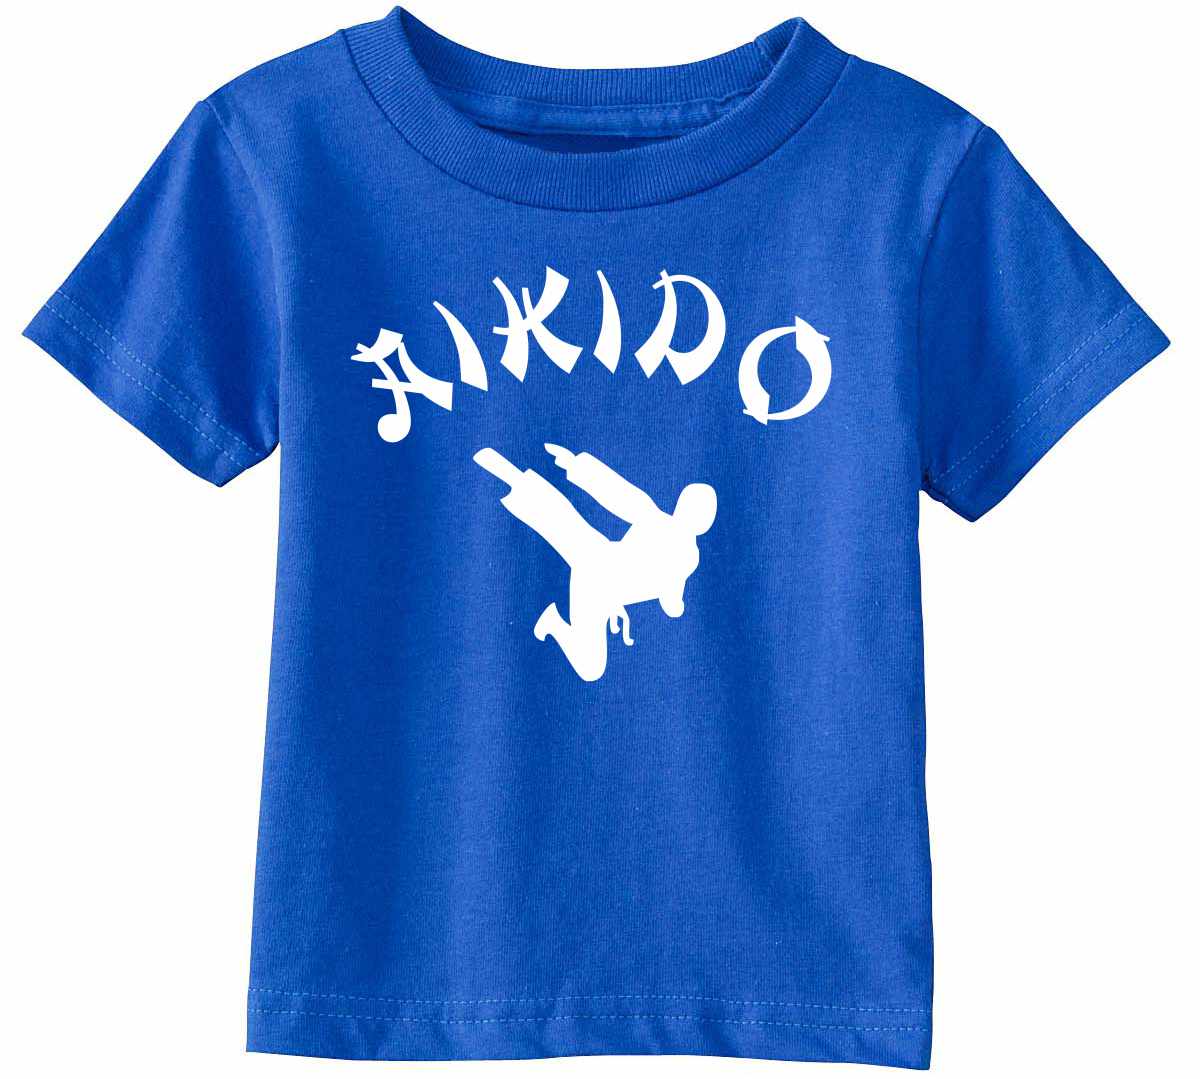 AIKIDO Infant/Toddler  (#816-7)